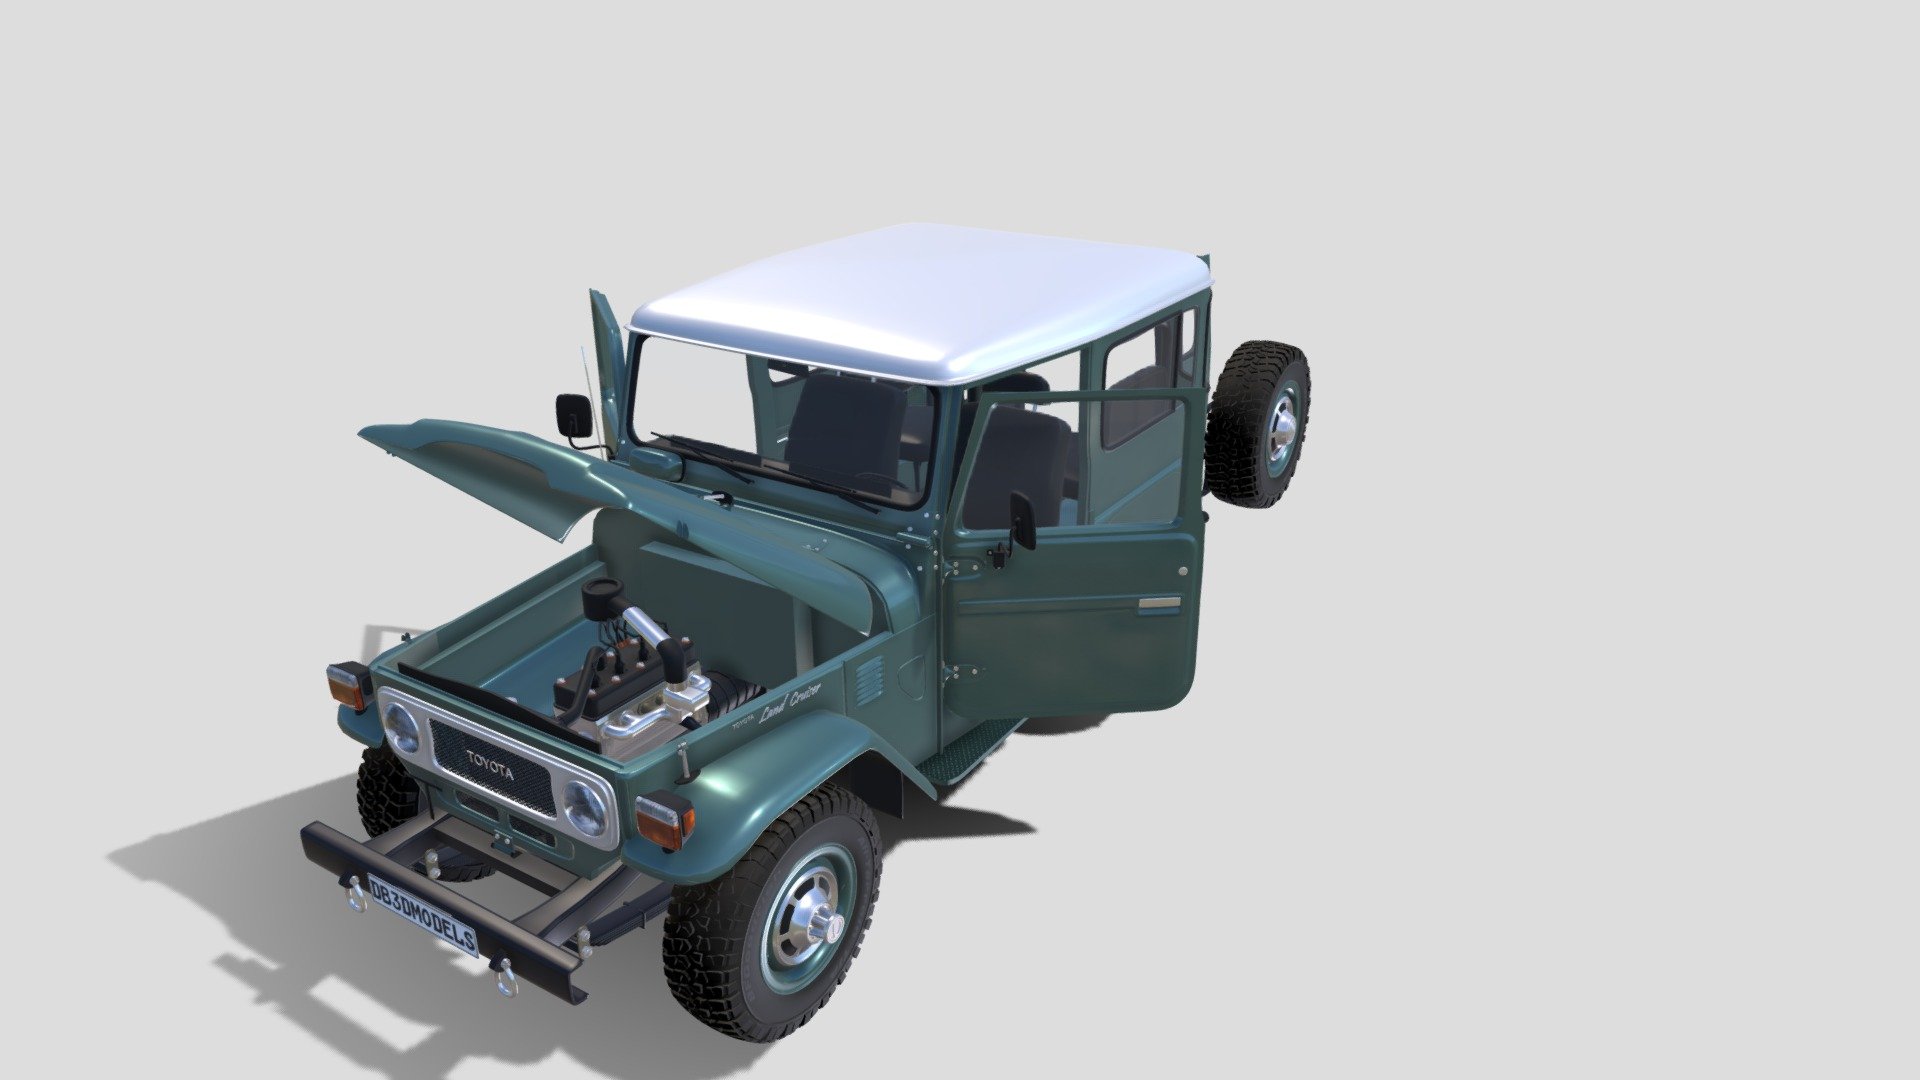 A very accurate model of the Toyota Land Cruiser FJ-40, with a HIGHLY DETAILED INTERIOR AND CHASSIS, WITH ENGINE, SUSPENSION AND BRAKES MODELED.

File formats:
-.blend, rendered with cycles, as seen in the images;
-.blend, rendered with cycles, with doors open, as seen in images;
-.obj, with materials applied and textures;
-.obj, with materials applied and textures and doors open;
-.dae, with materials applied and textures;
-.dae, with materials applied and textures and doors open;
-.fbx, with material slots applied;
-.fbx, with material slots applied and doors open;
-.stl;
-.stl with doors open;

3D Software:
This 3d model was originally created in Blender 2.79 and rendered with Cycles.

Materials and textures:
The model has materials applied in all formats, and is ready to import and render.
The model comes with multiple png image textures.

Preview scenes:
The preview images are rendered in Blender using its built-in render engine &lsquo;Cycles' 3d model